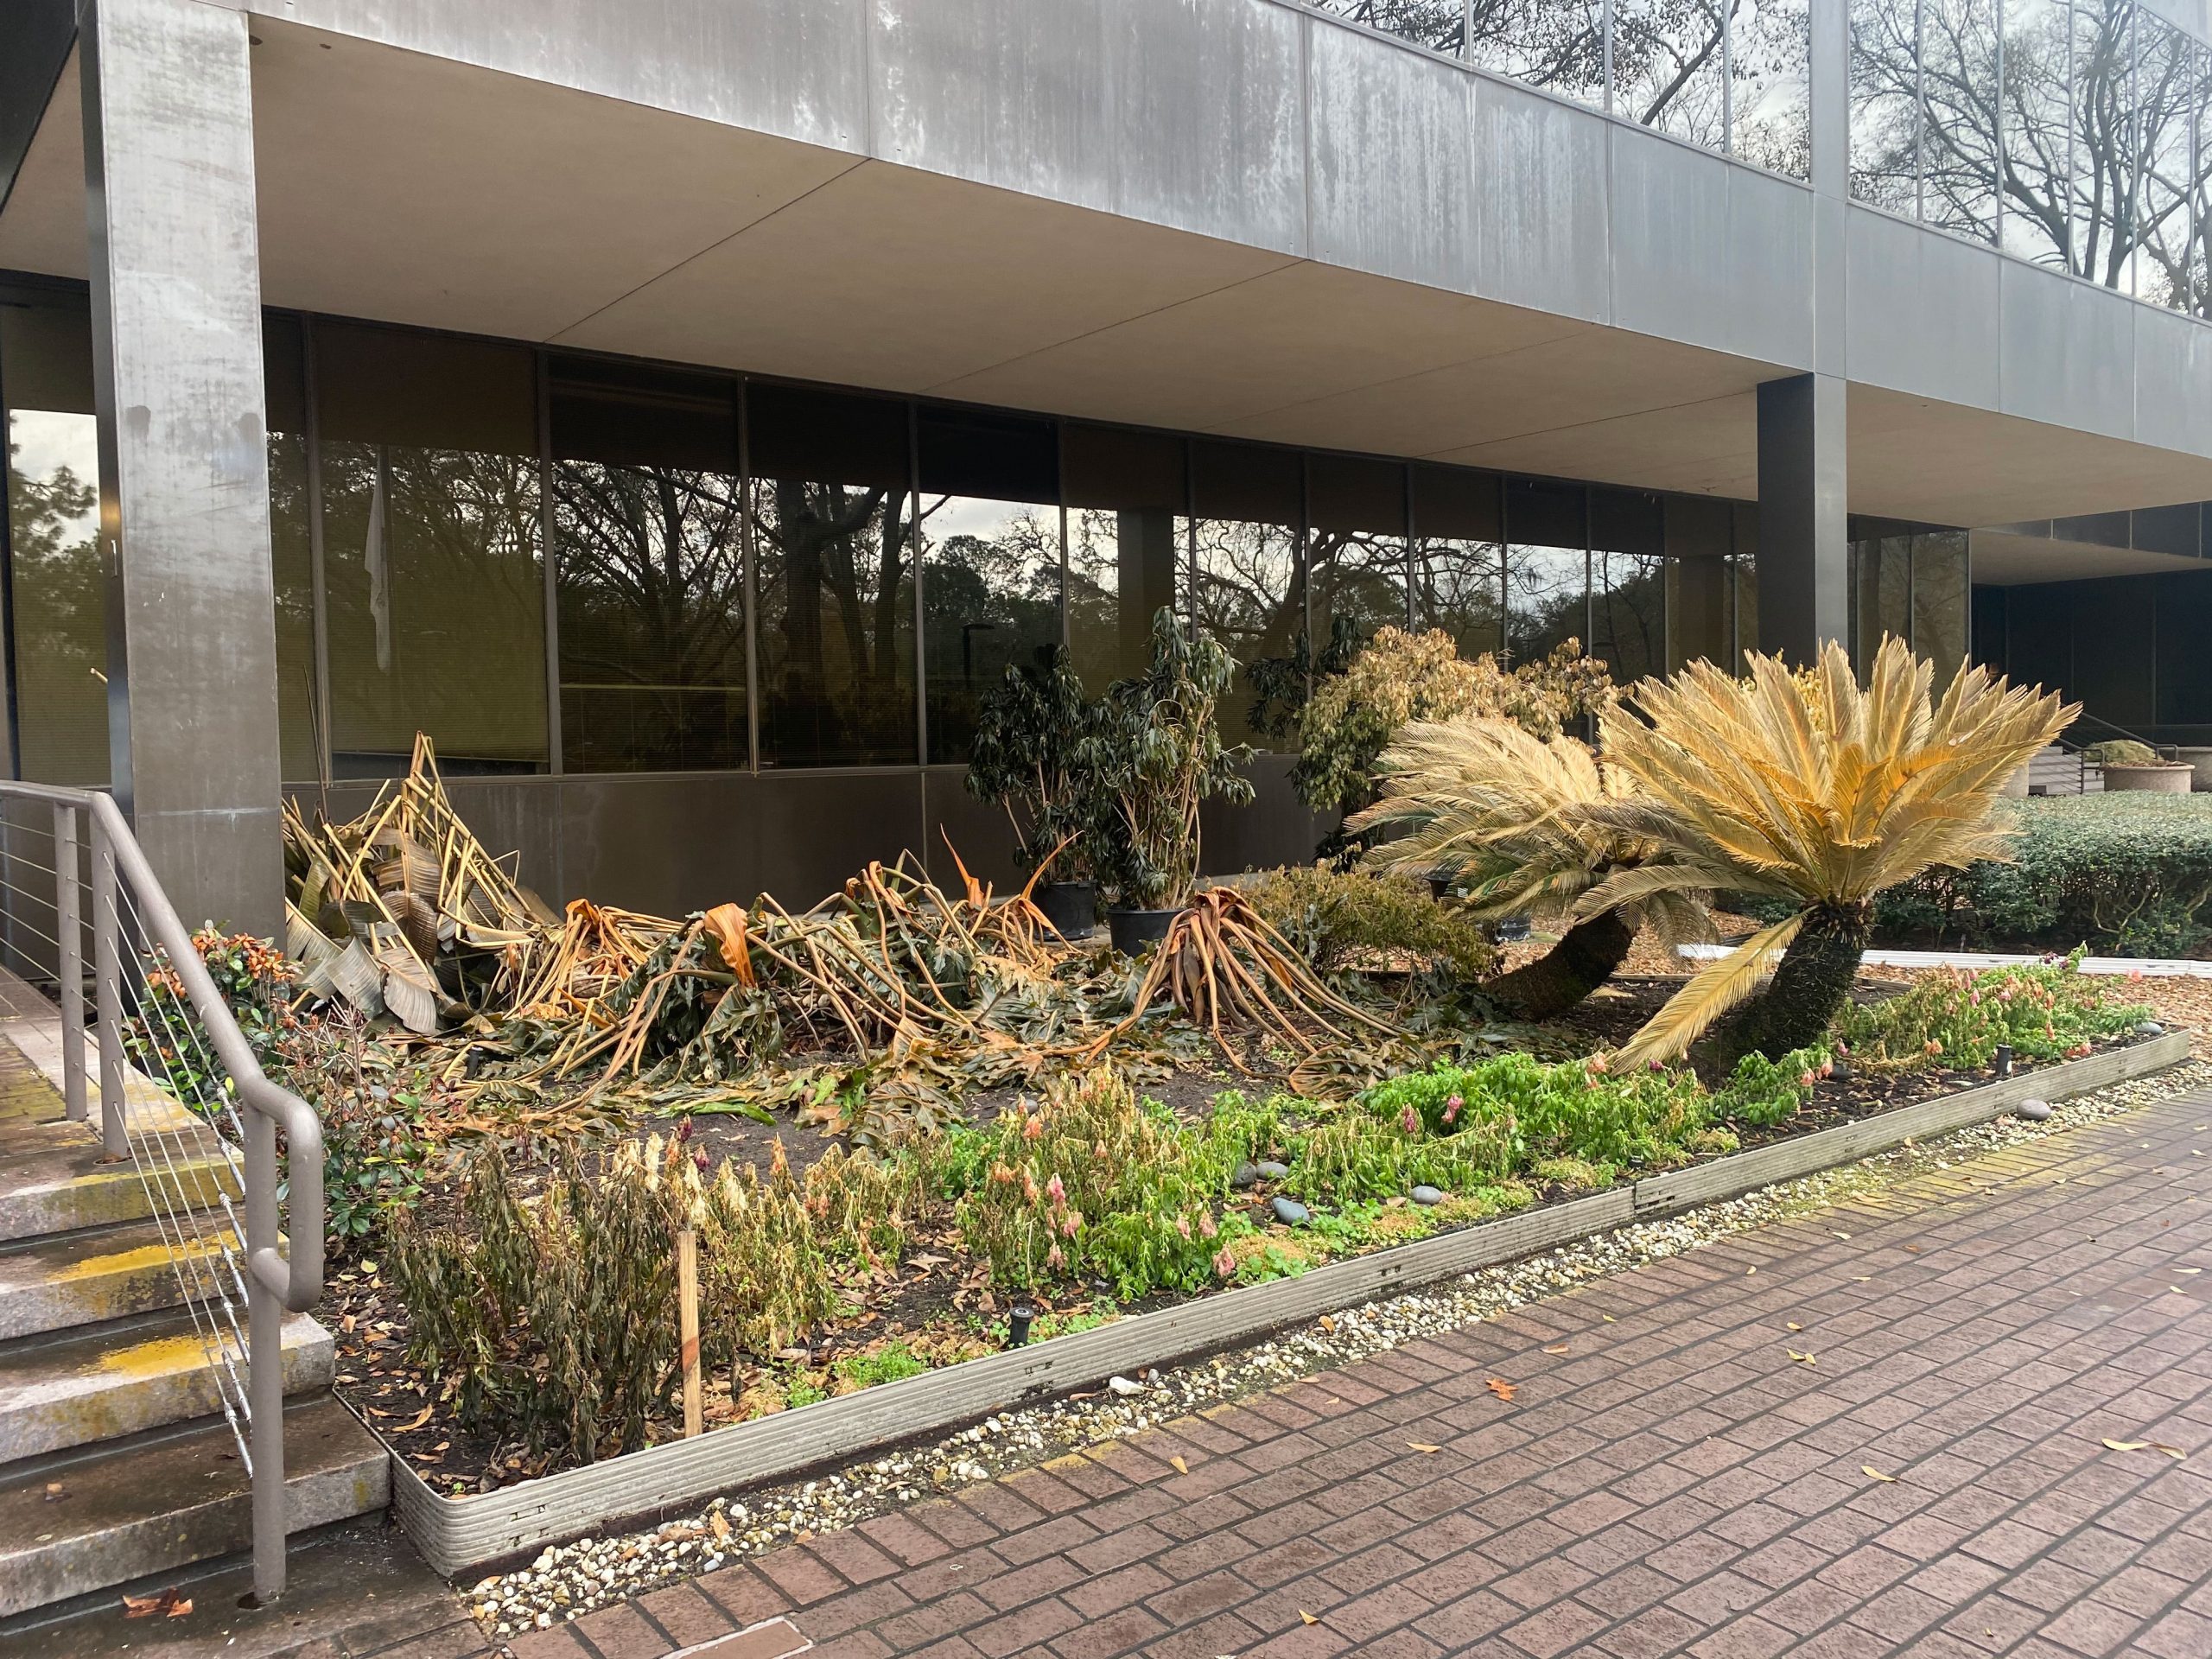 PHOTO: Image depicts palm trees and other trees in front of one of UHCL's entrances. One of the trees is heavily withered as a result of Winter Storm Uri. Photo by The Signal Editor in Chief Emily Wolfe.